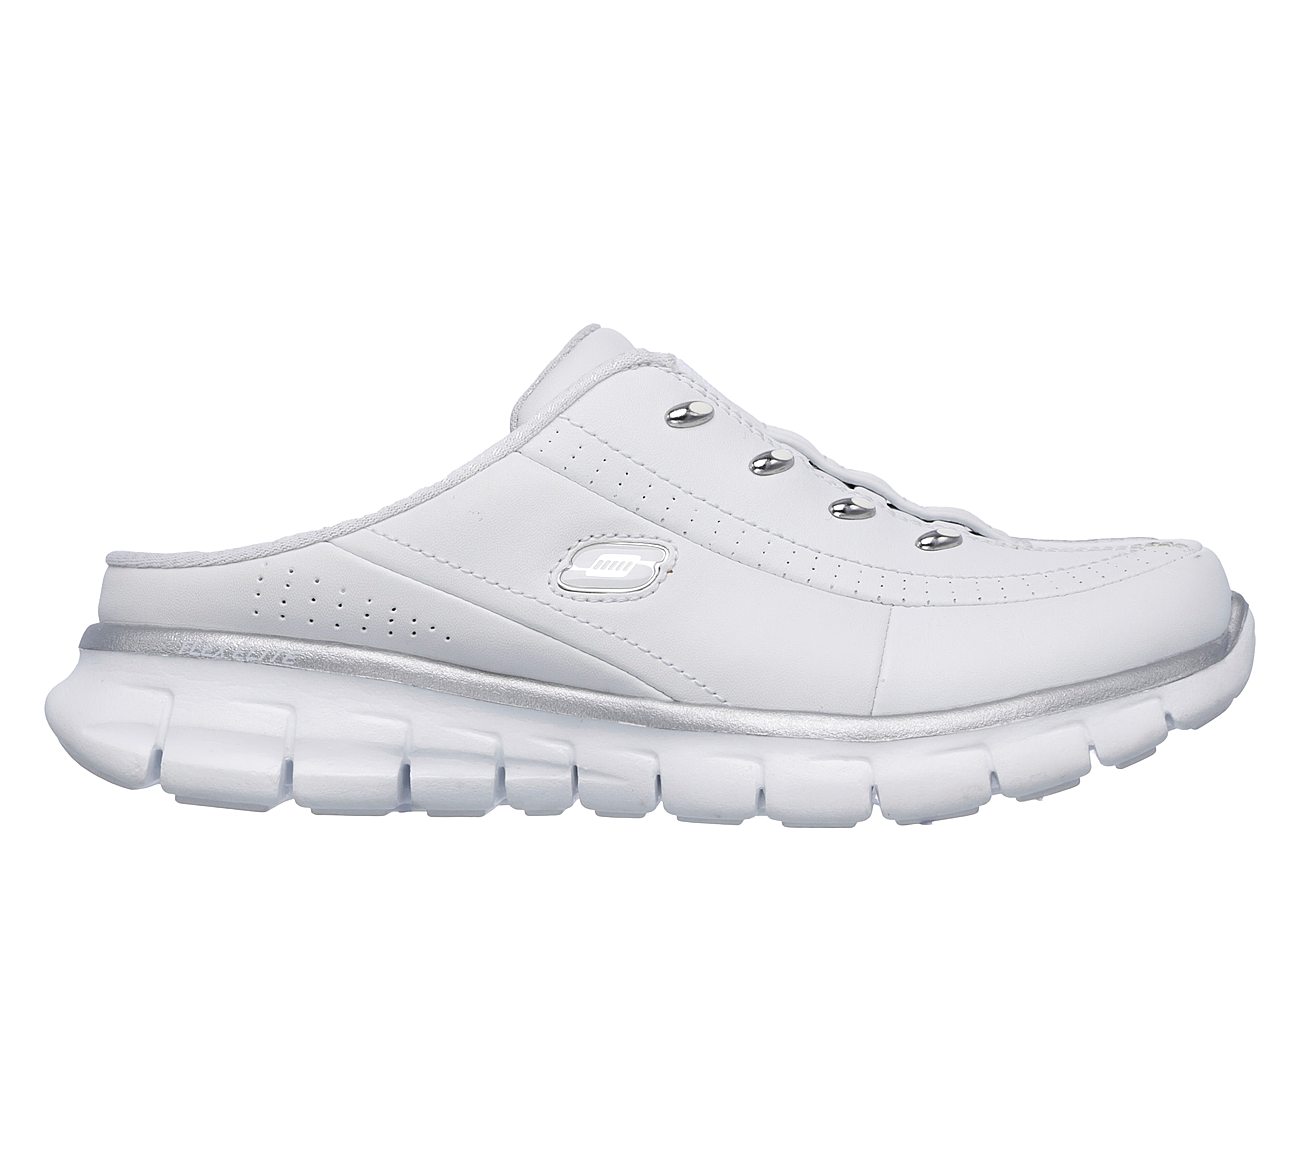 Buy SKECHERS Synergy - Elite Glam Sport Shoes only $67.00